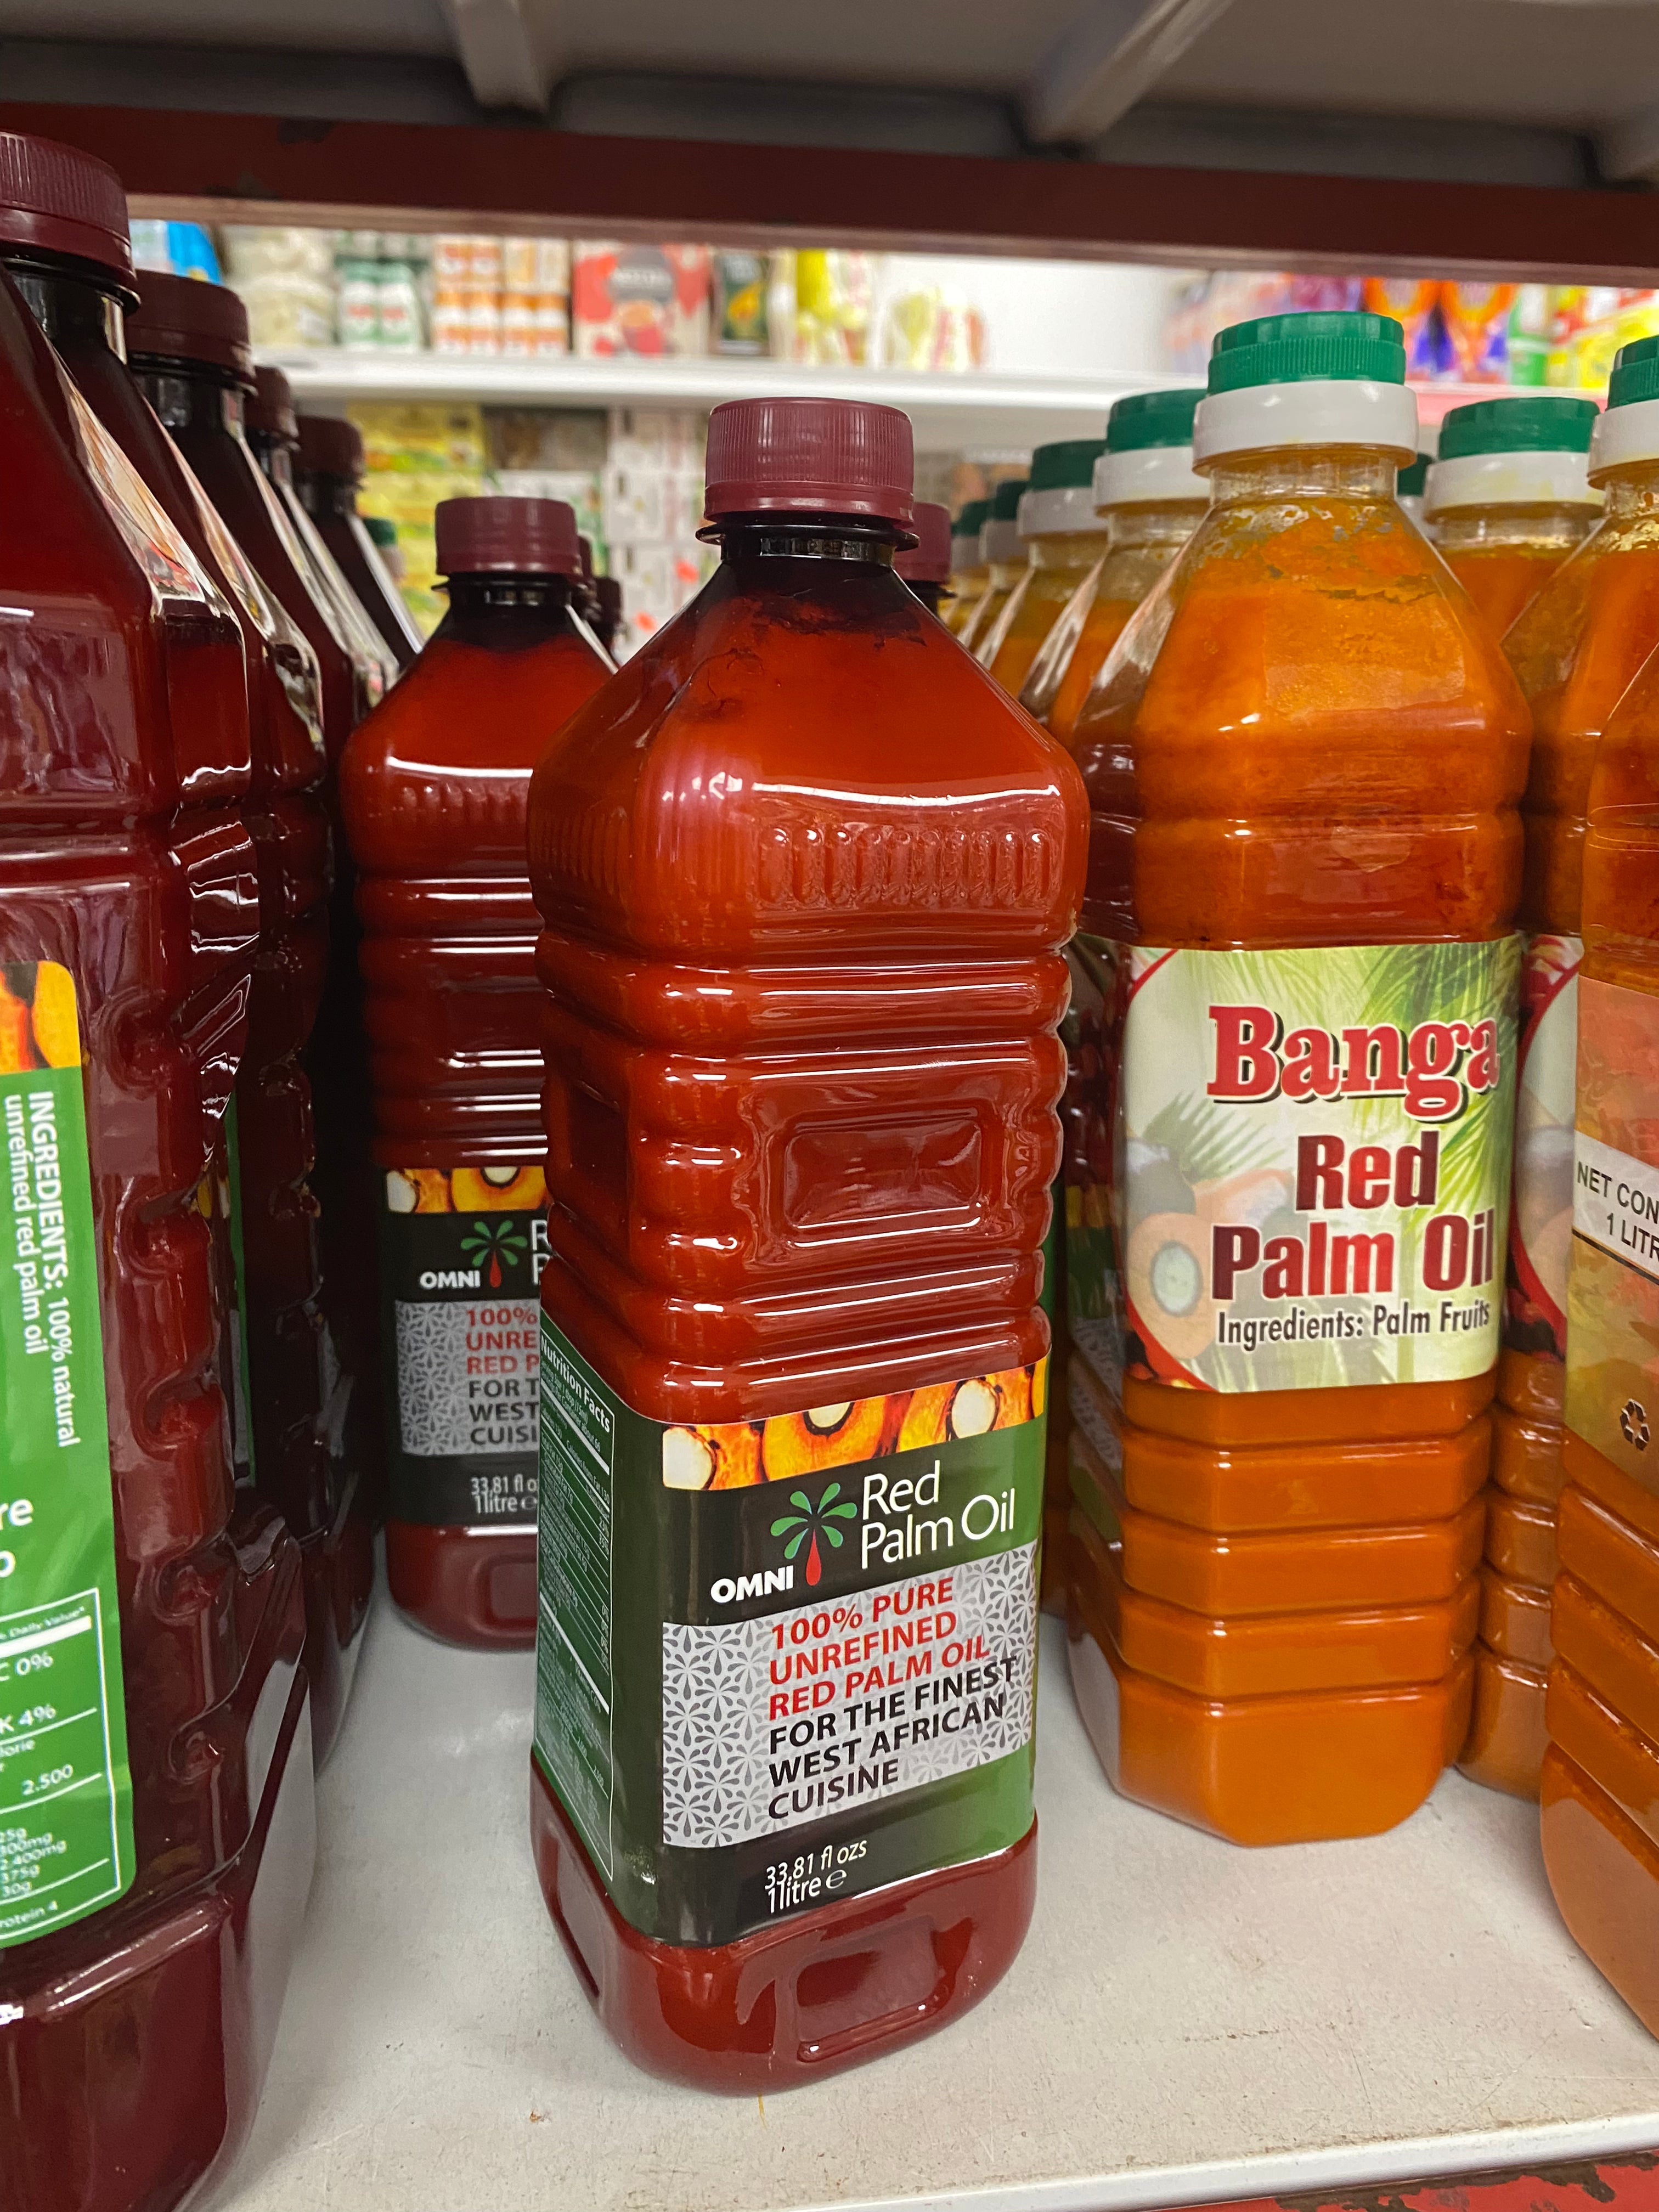 Palm Oil (Red Oil)